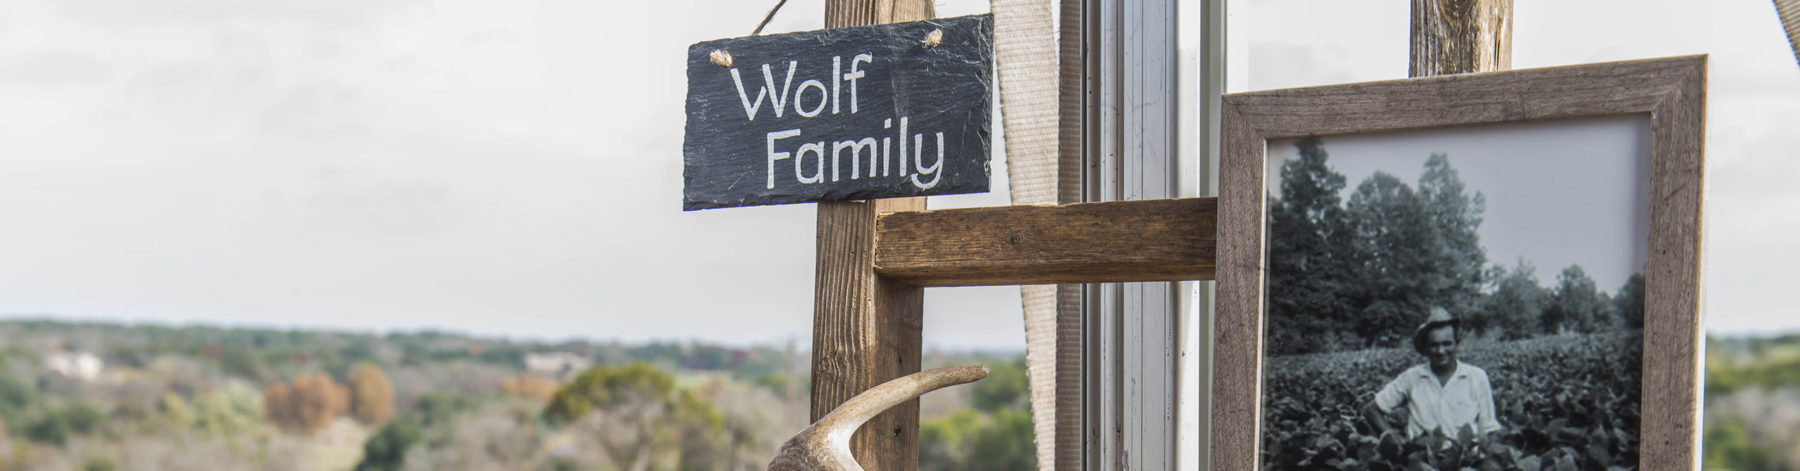 Wolf Family Heritage